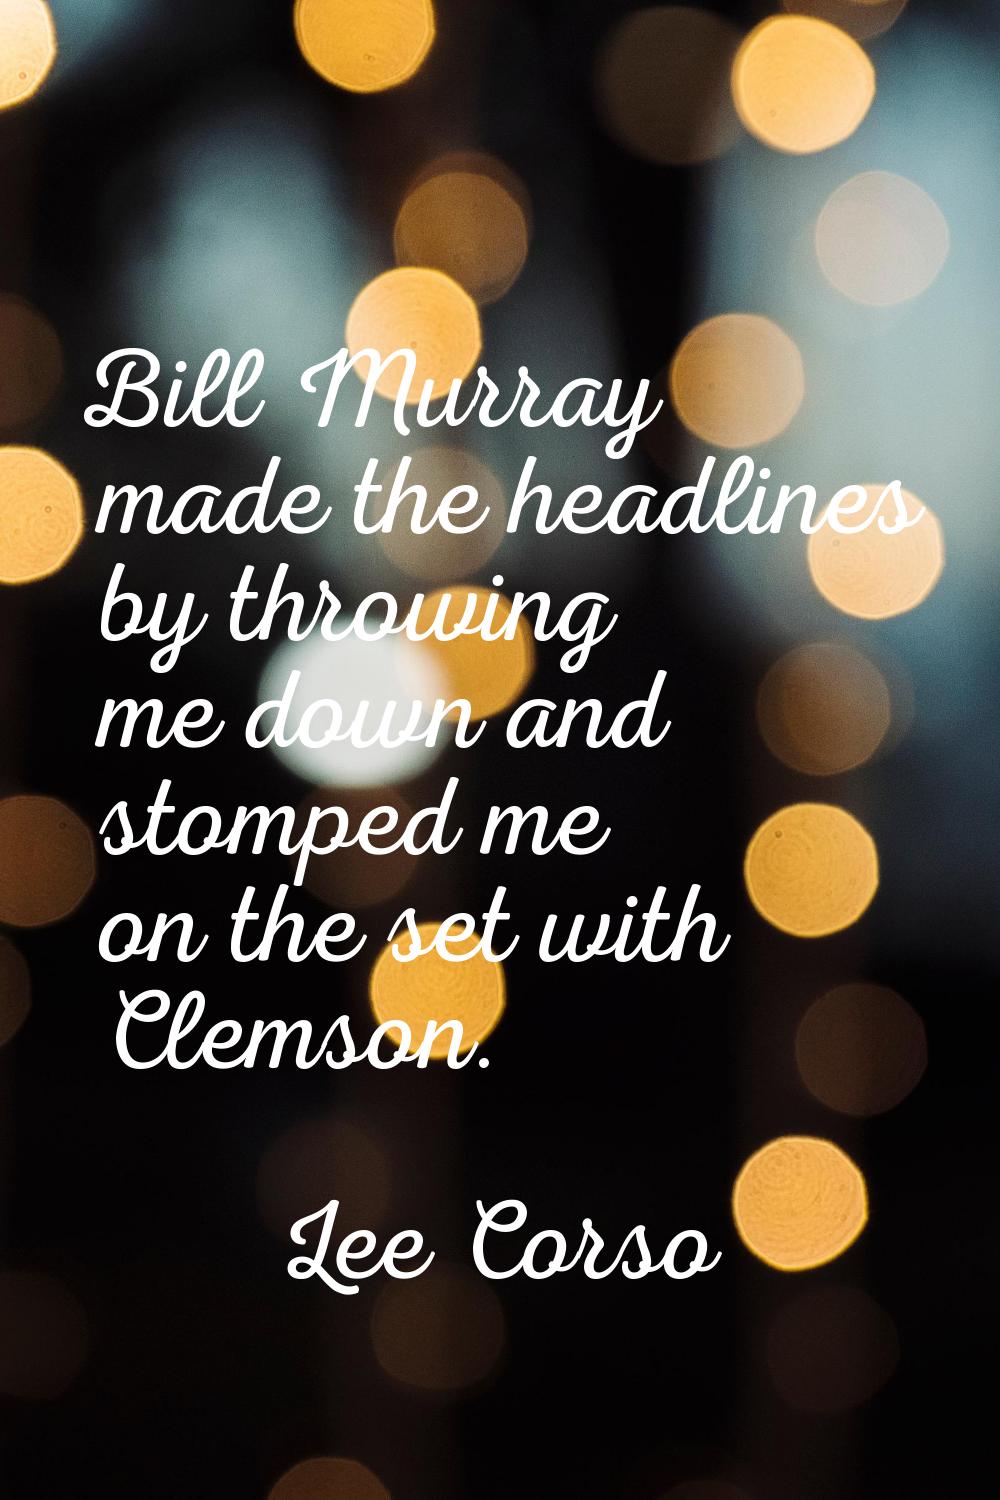 Bill Murray made the headlines by throwing me down and stomped me on the set with Clemson.